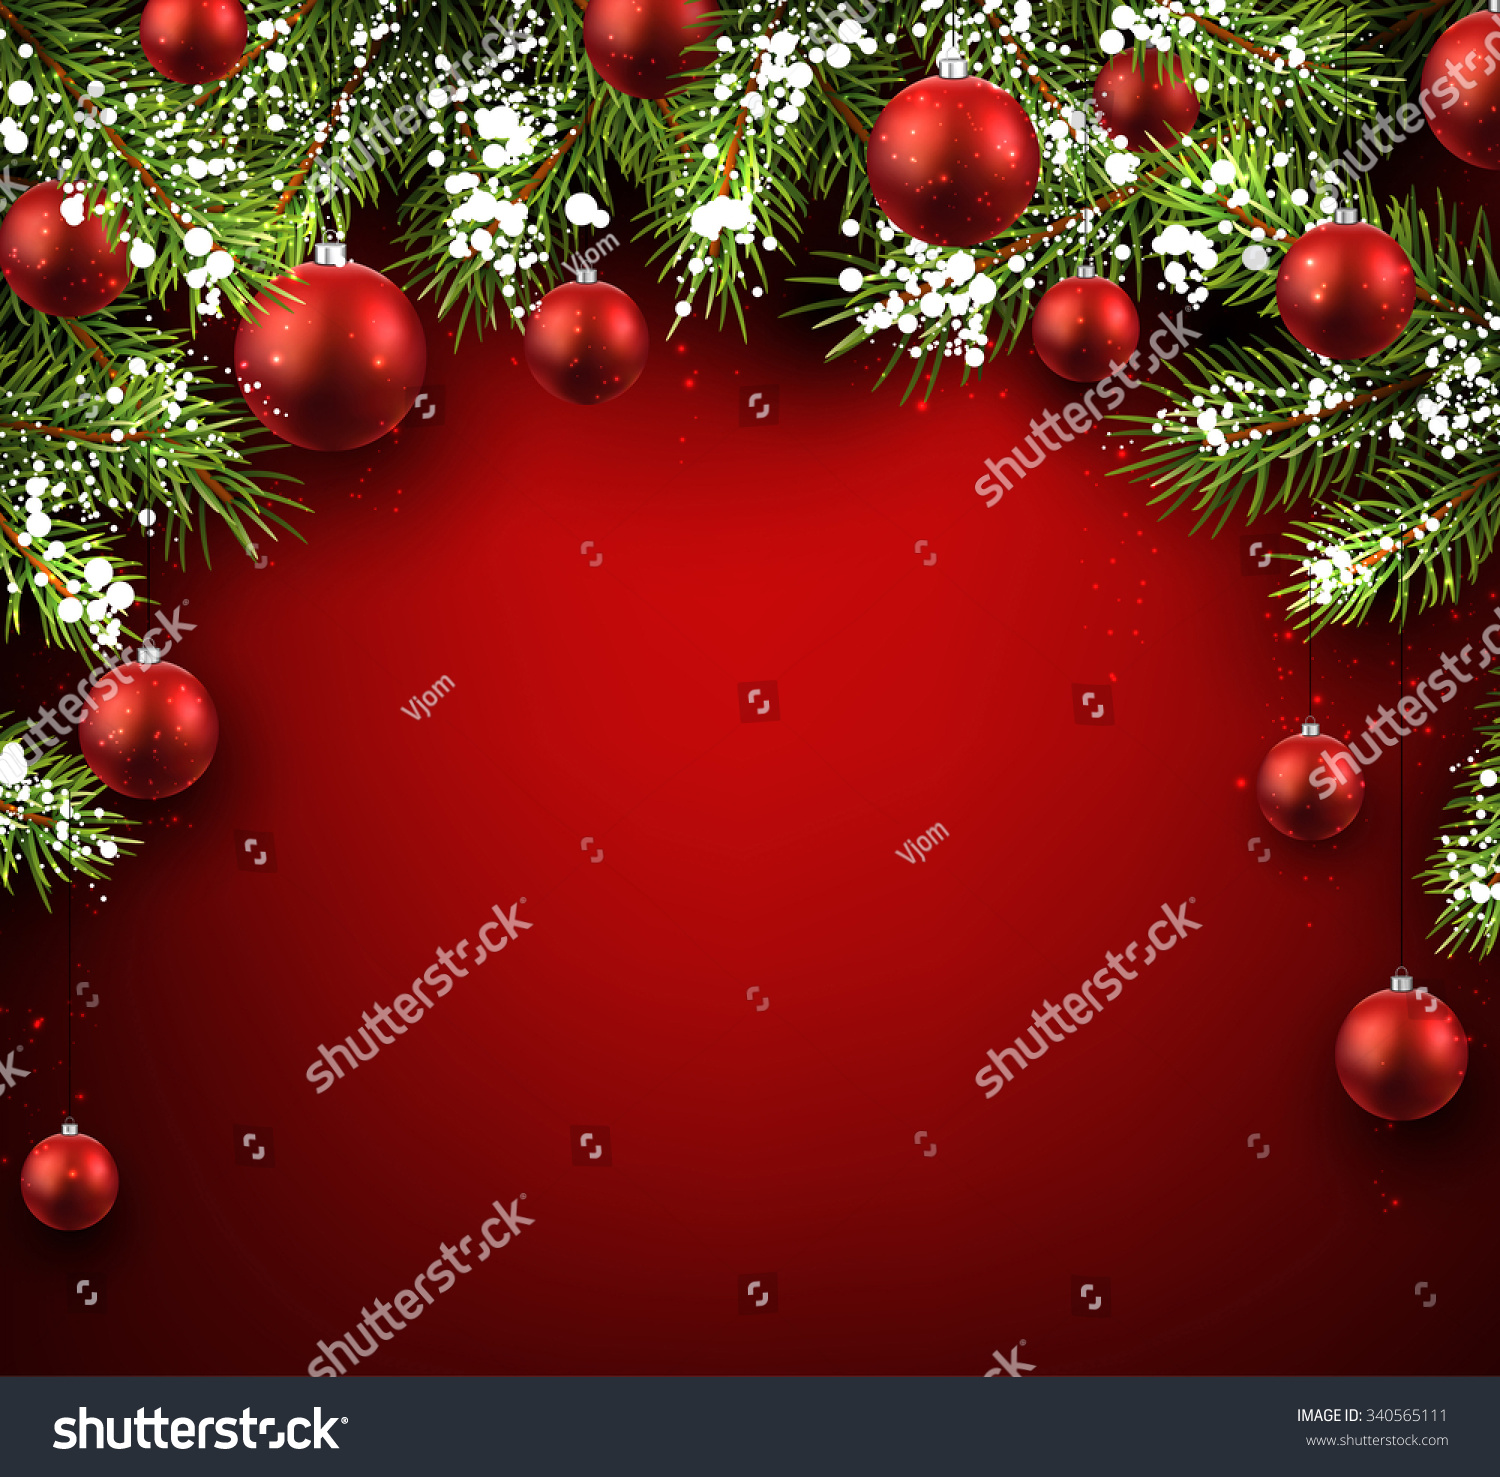 Christmas Red Background With Fir Branches And Balls. Vector ...